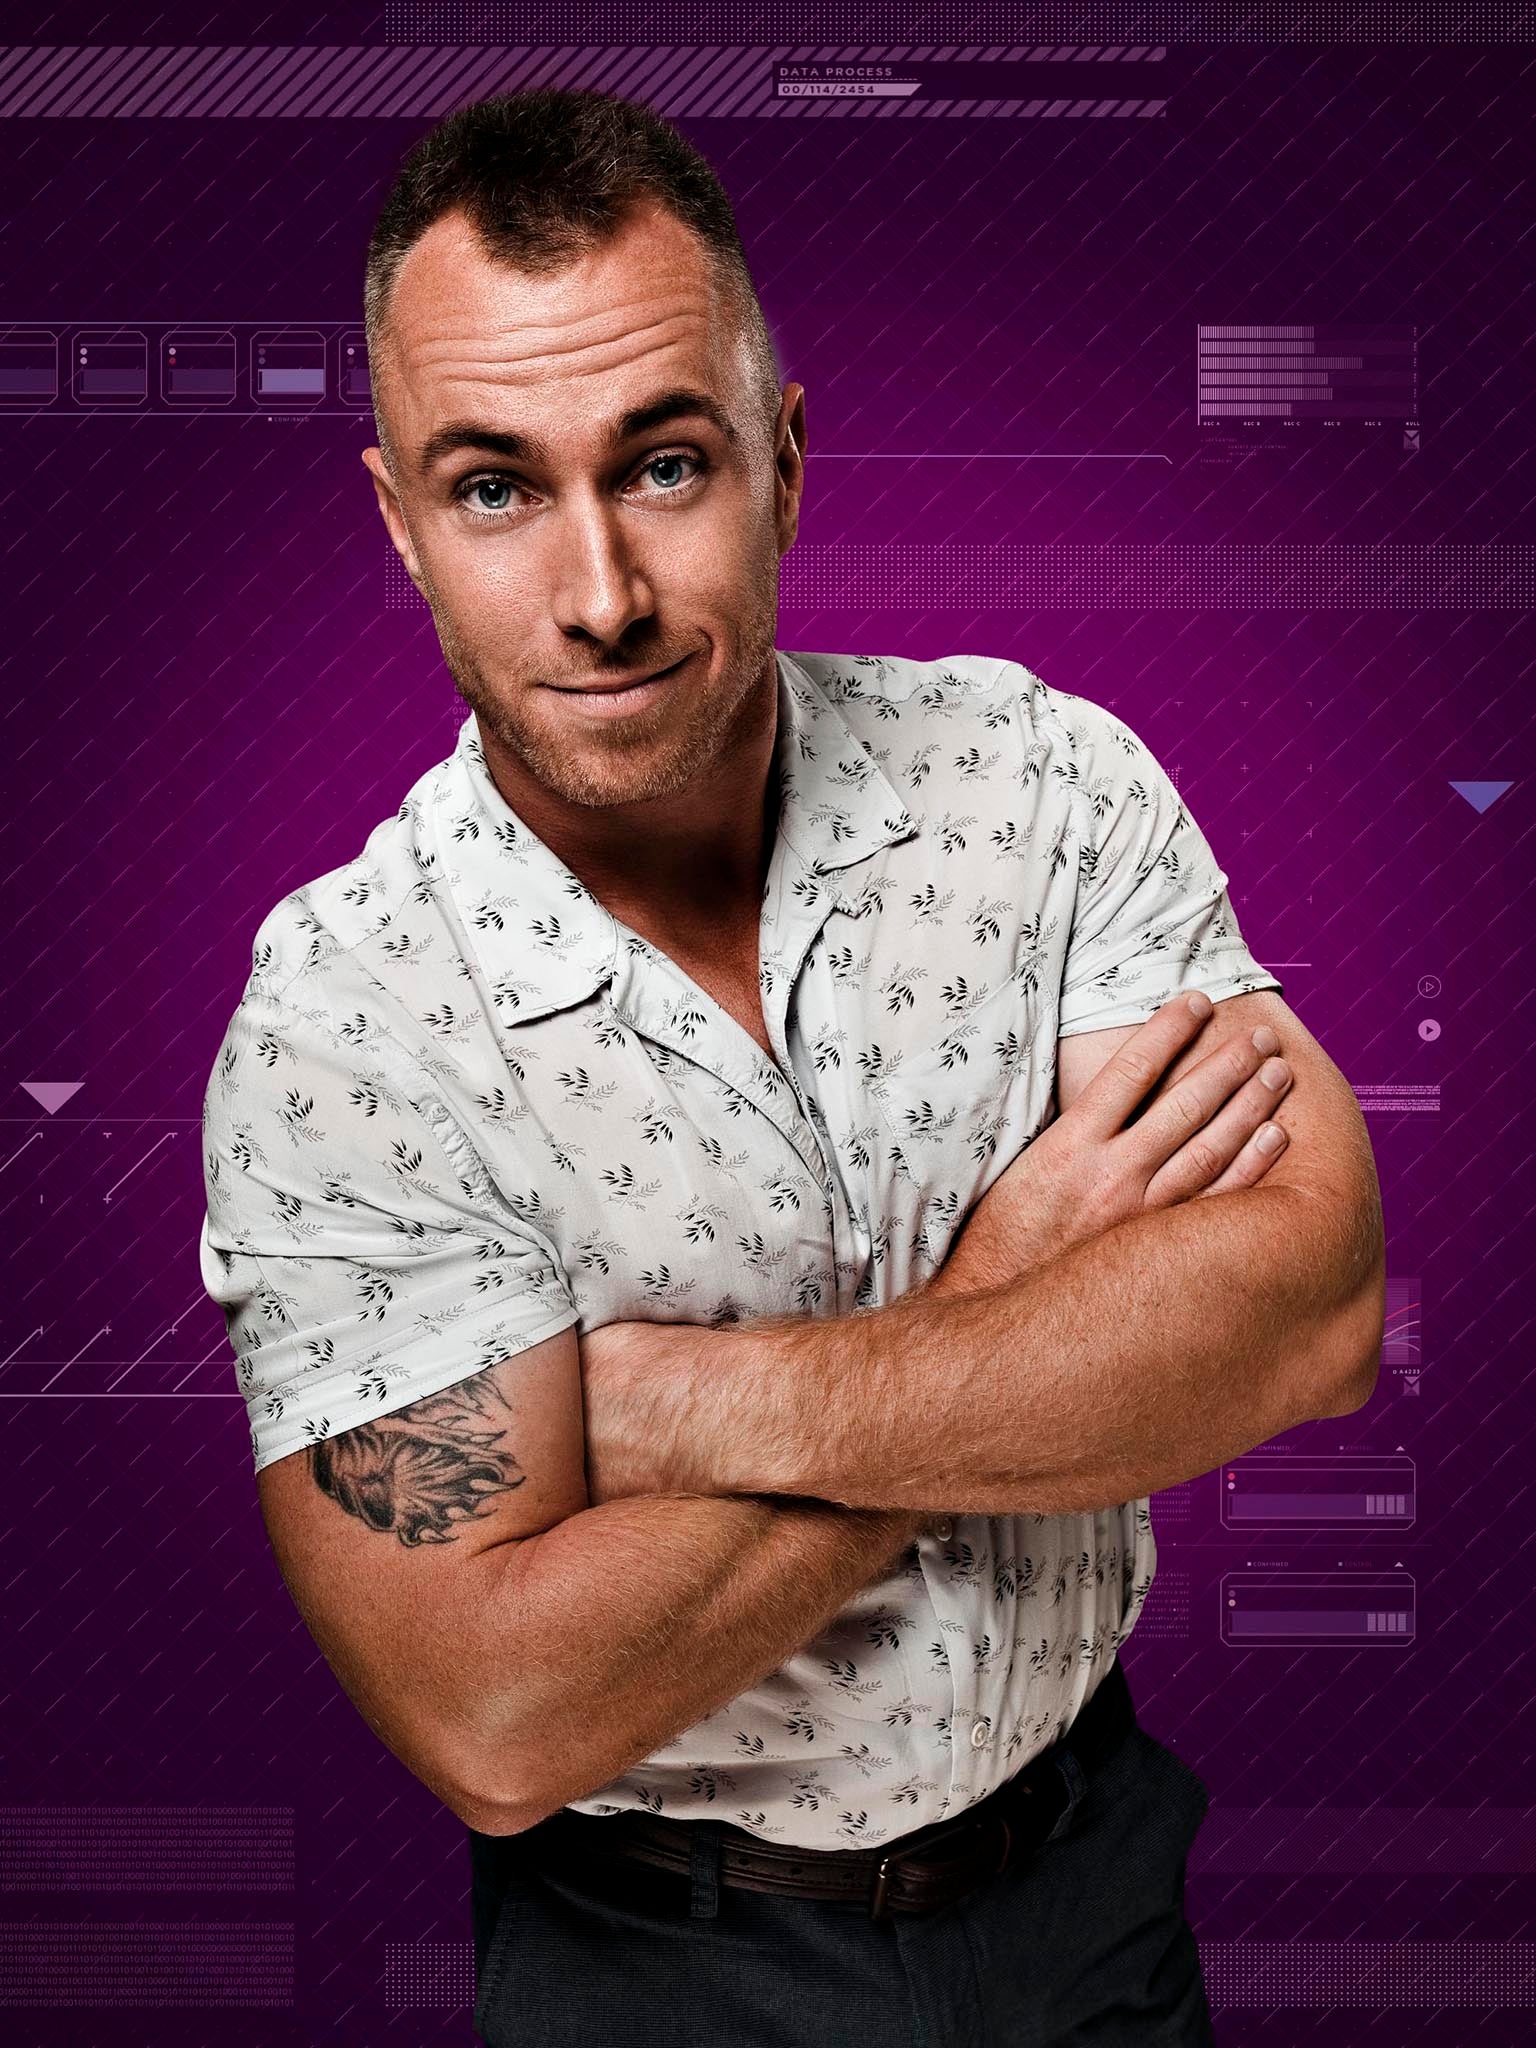 James Jordan from Strictly Come Dancing is entering the CBB house